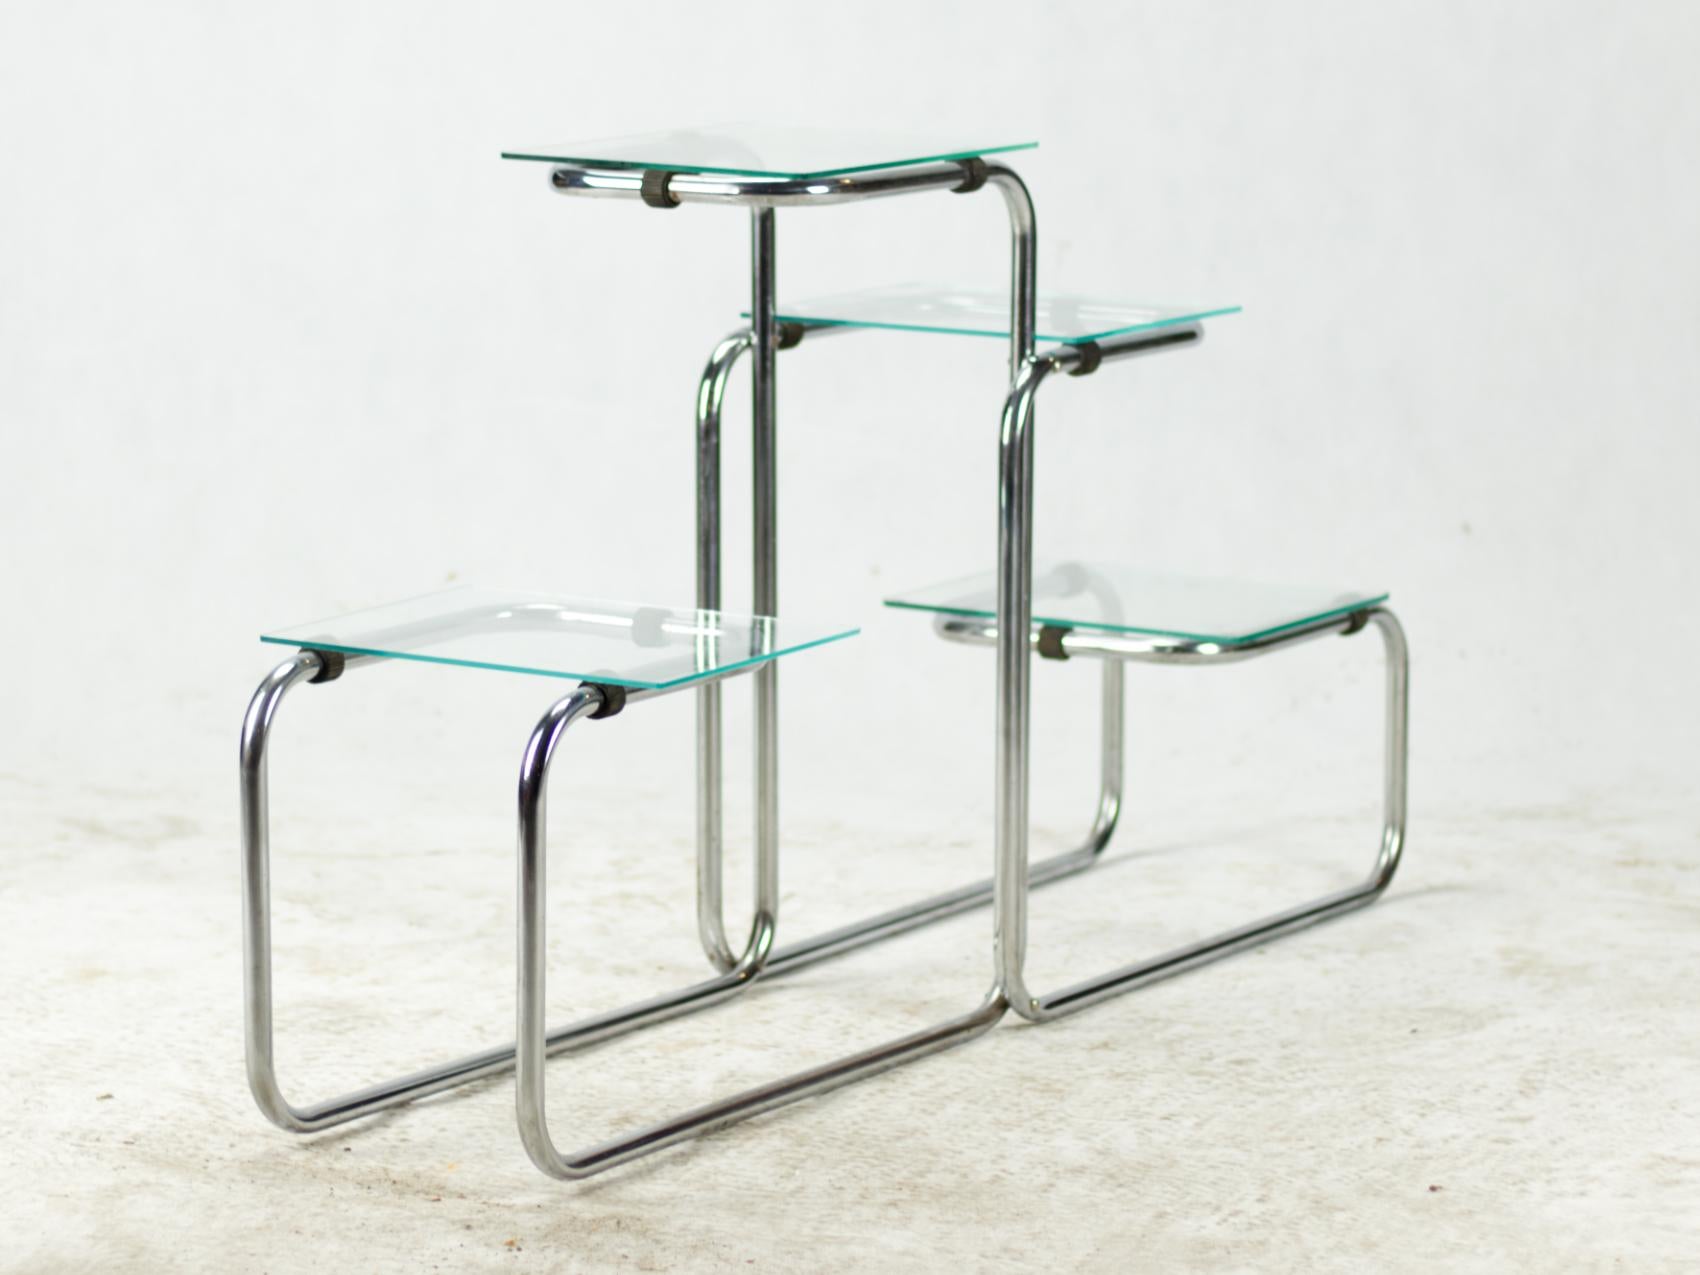 Chrome-plated tubular steel étagère made in the 1930s with glass shelves. Chrome plating is in original condition.